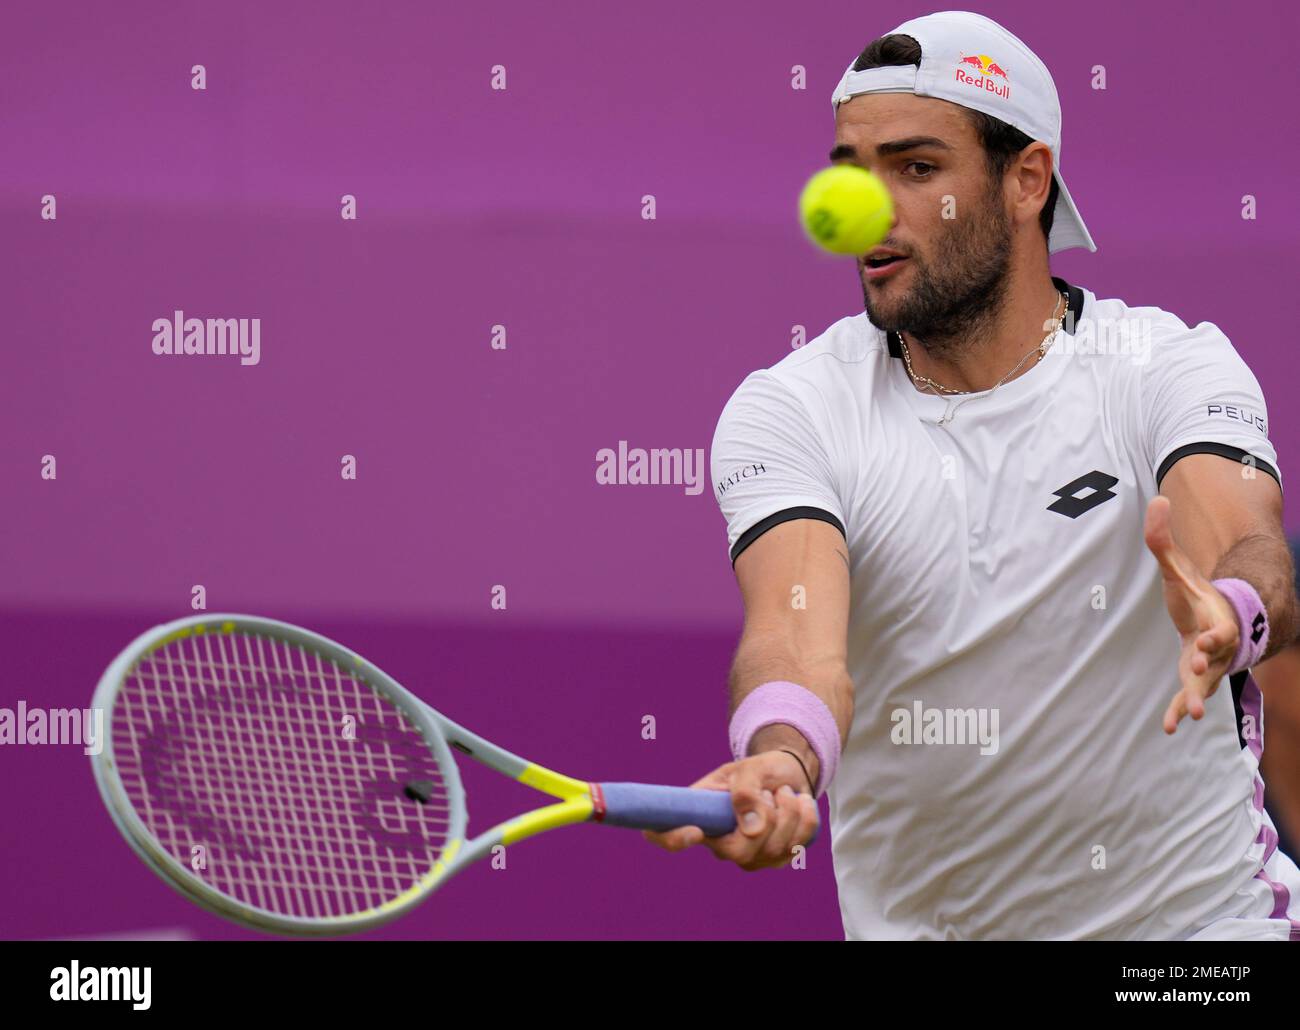 Matteo Berrettini of Italy plays a return to Andy Murray of Britain during their singles tennis match at the Queens Club tournament in London, Thursday, June 17, 2021